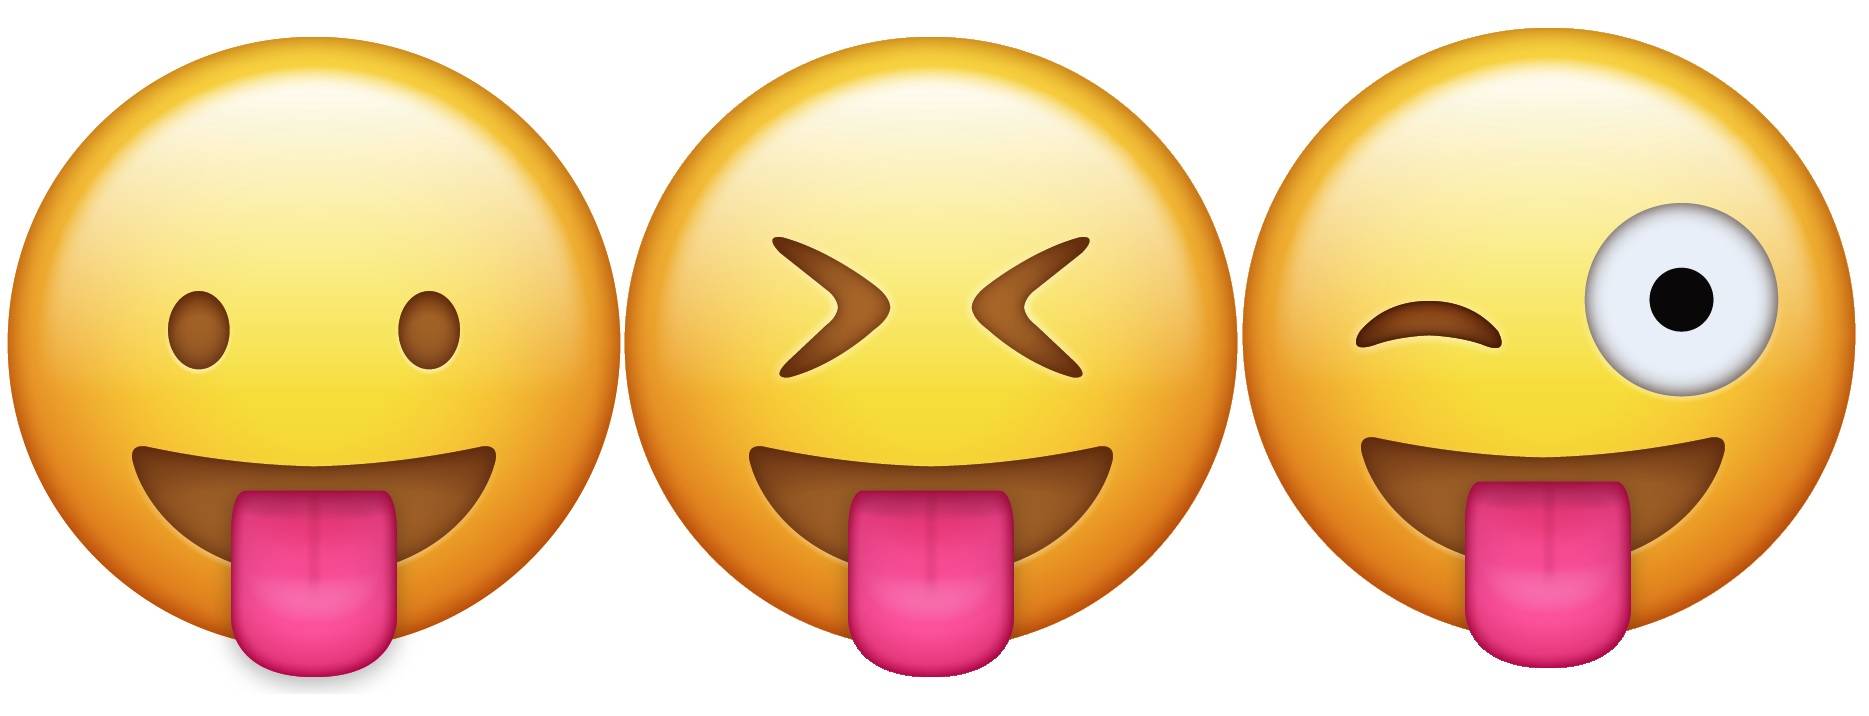 What Does This Emoji Mean Emoji Face Meanings Explained